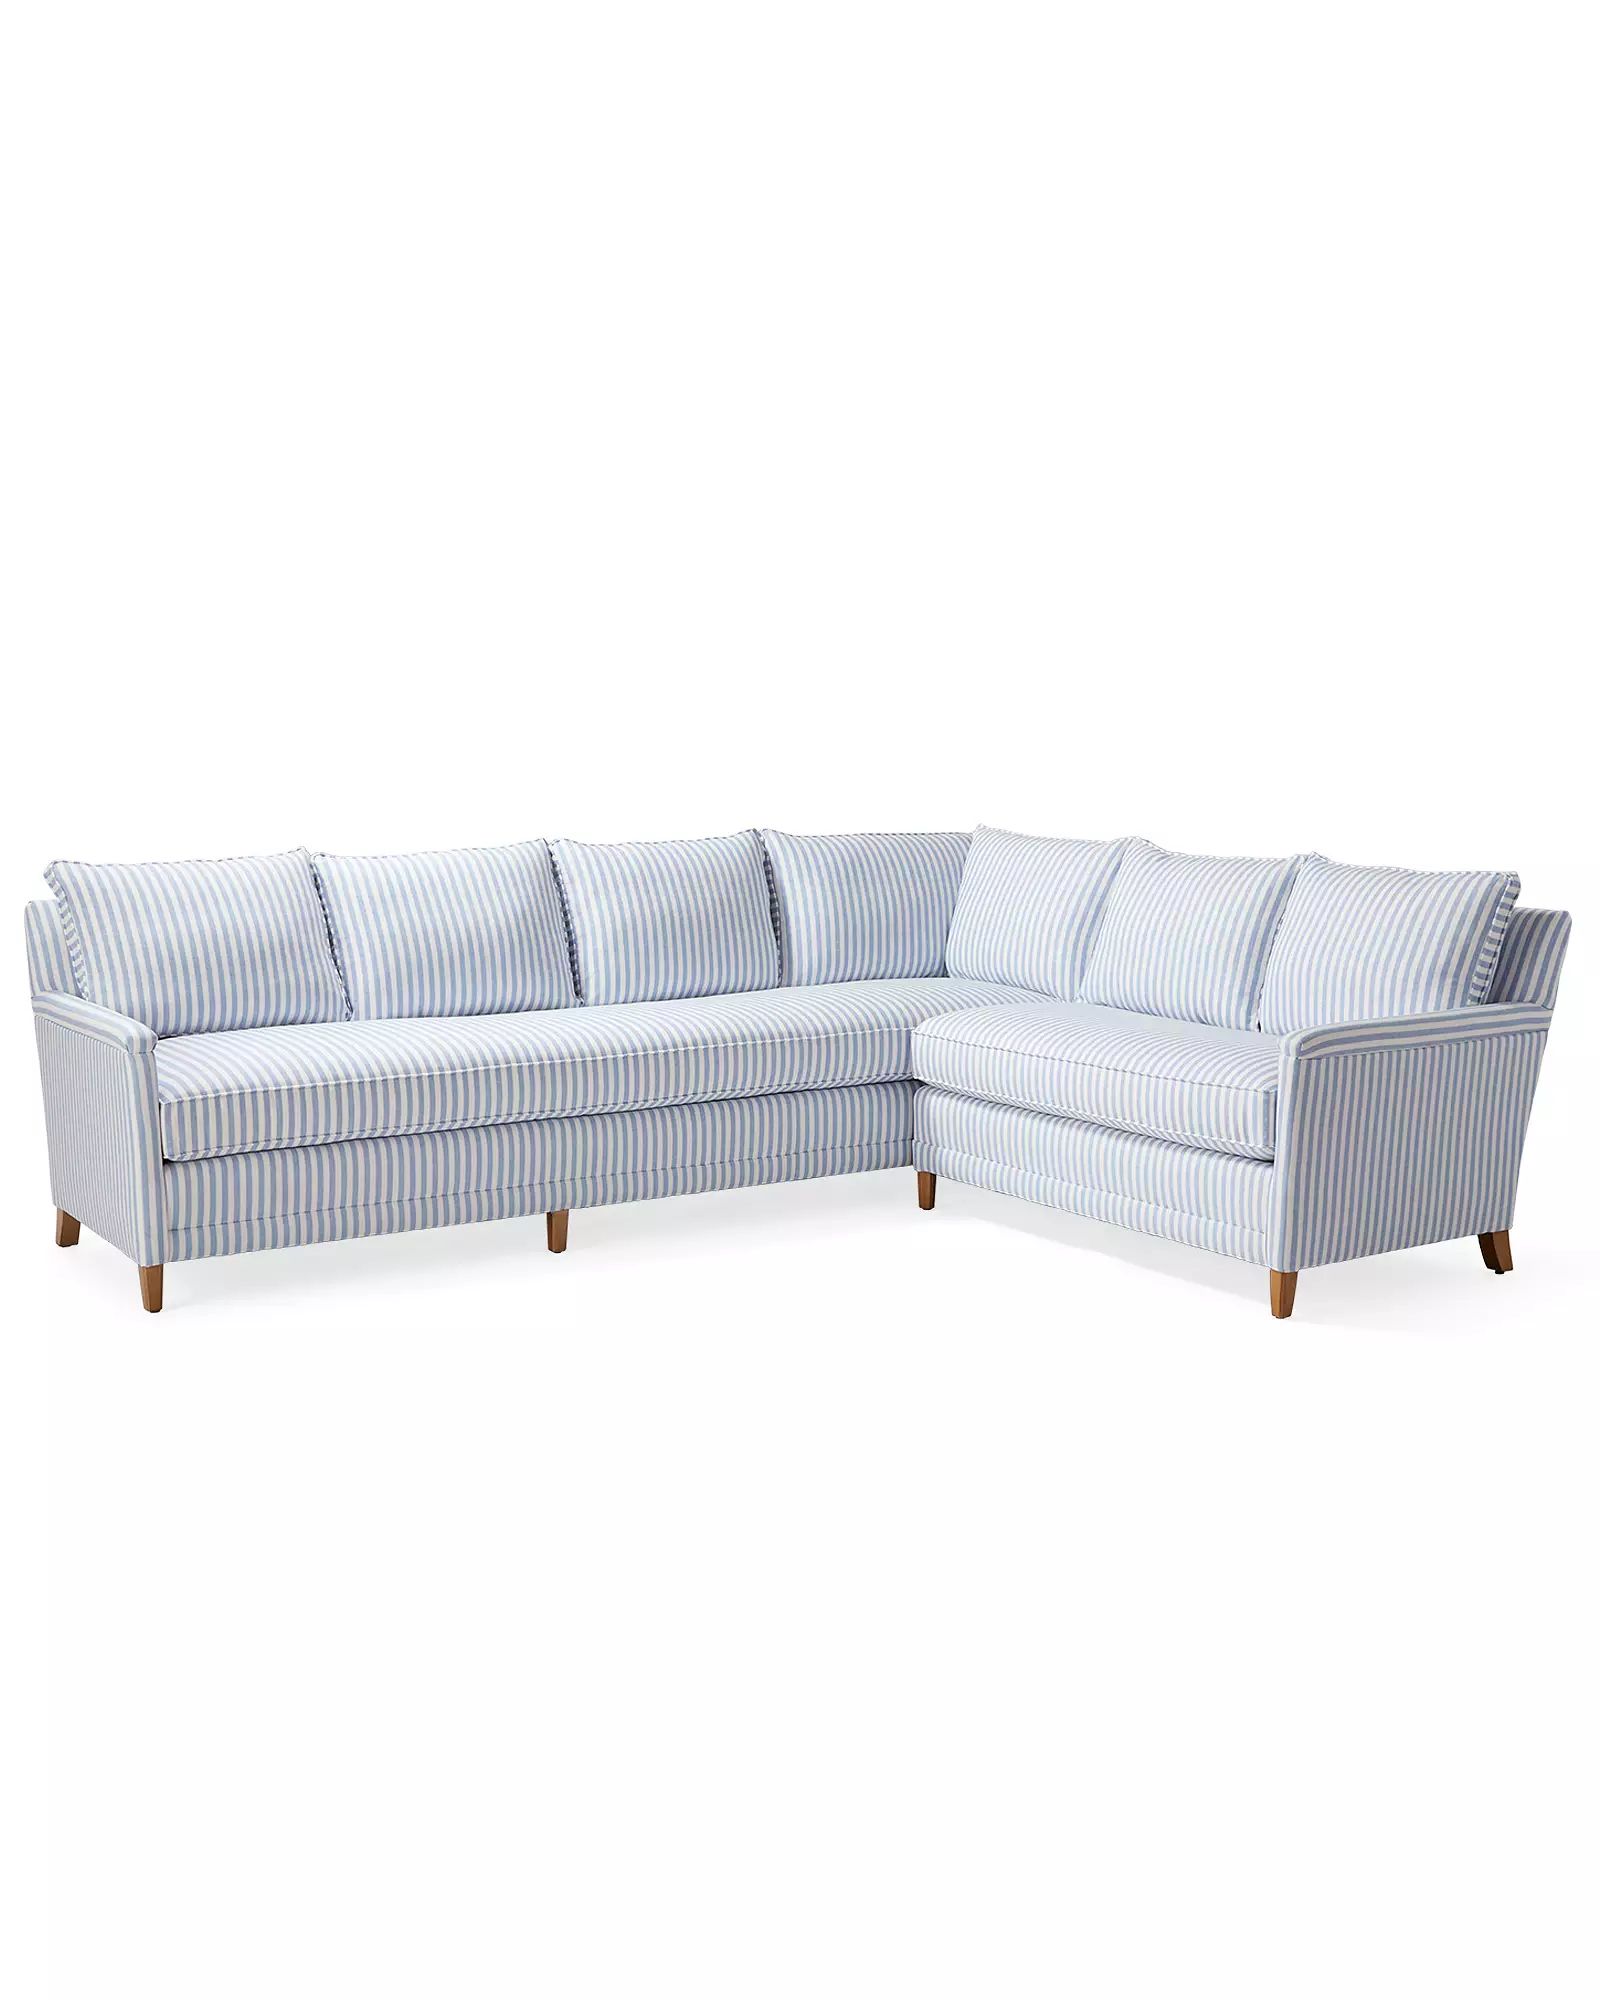 Spruce Street L-Sectional - Hydrangea Bengal Stripe Linen | Serena and Lily